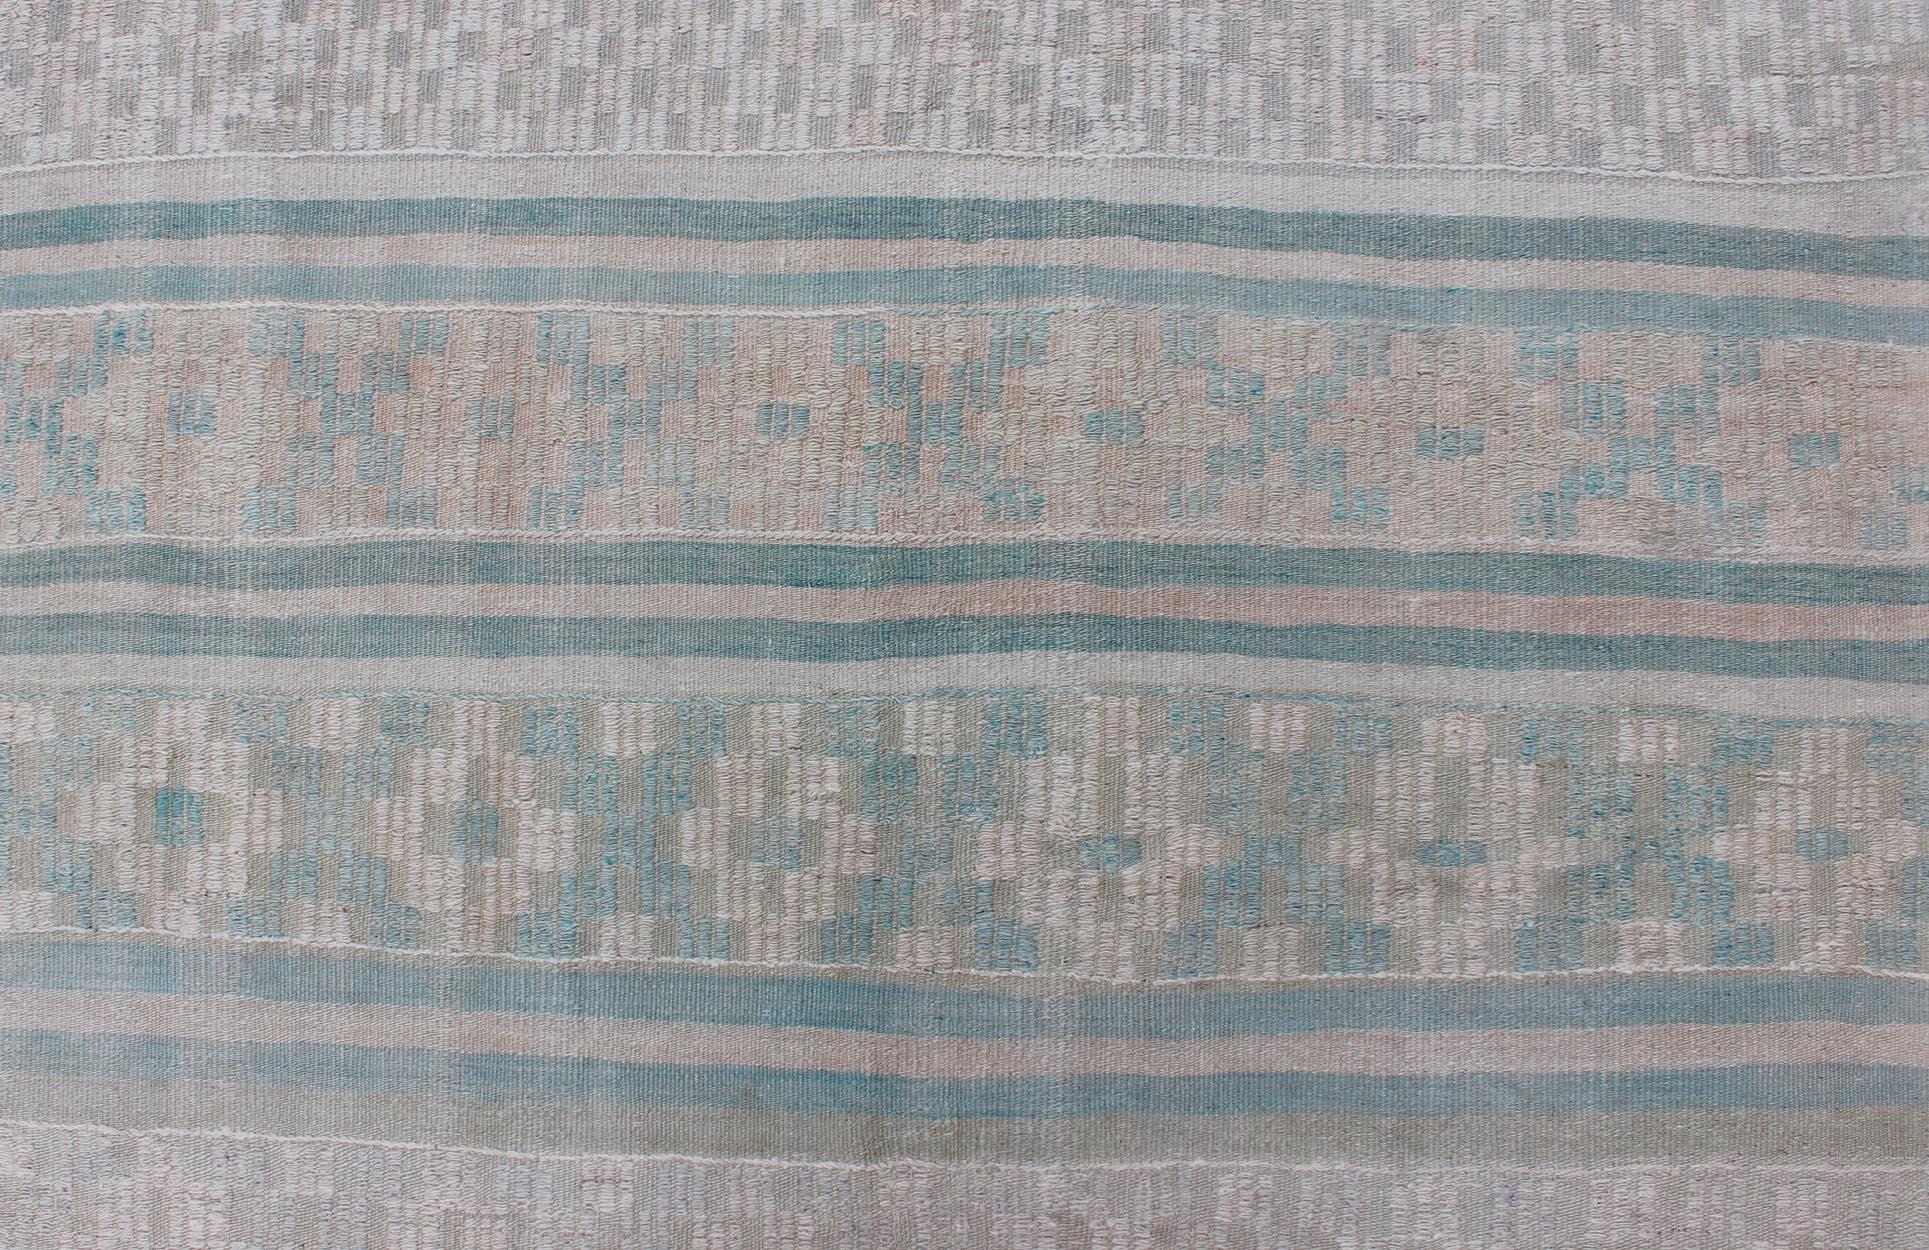 Vintage Flat-Weave Kilim with Embroideries in Blush, Green, Blue and Gray For Sale 1